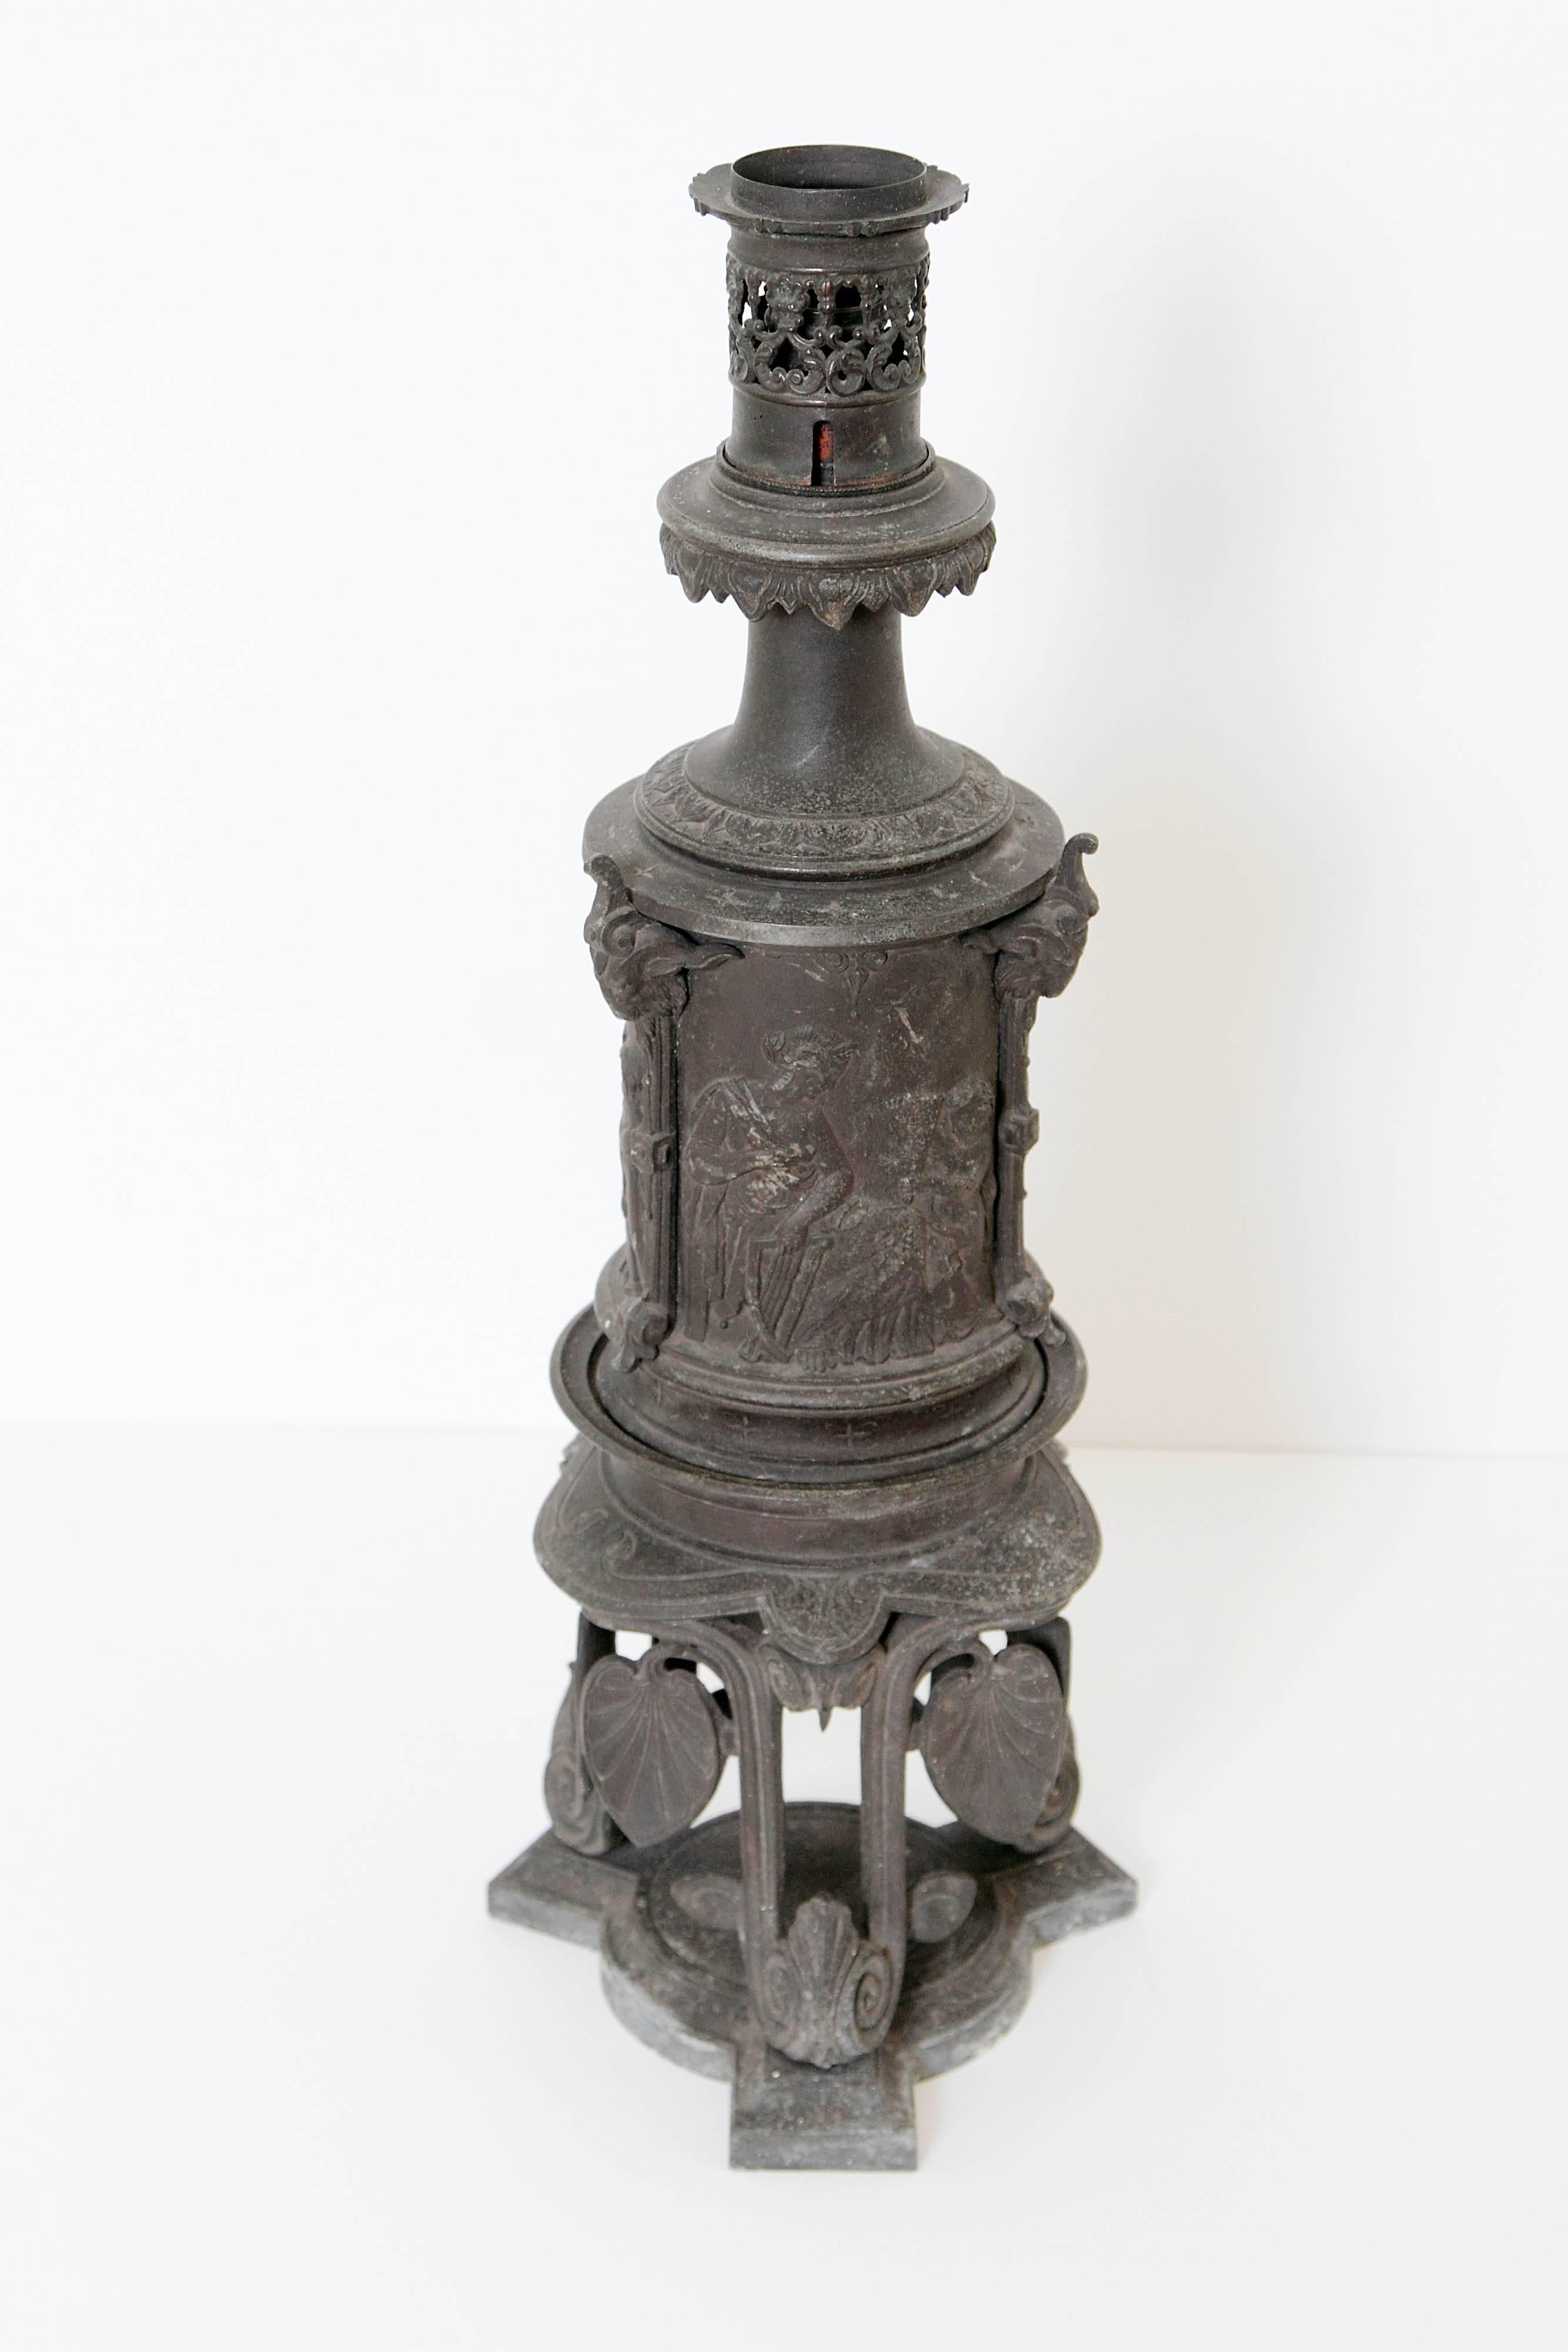 Interesting Napoleon III cast-spelter (looks like cast iron) carcel lamp on stand from the third quarter of the 19th century. Neo-Grec stylized decoration. 

Burner has been replaced by an electrical socket, however it is not in working order.